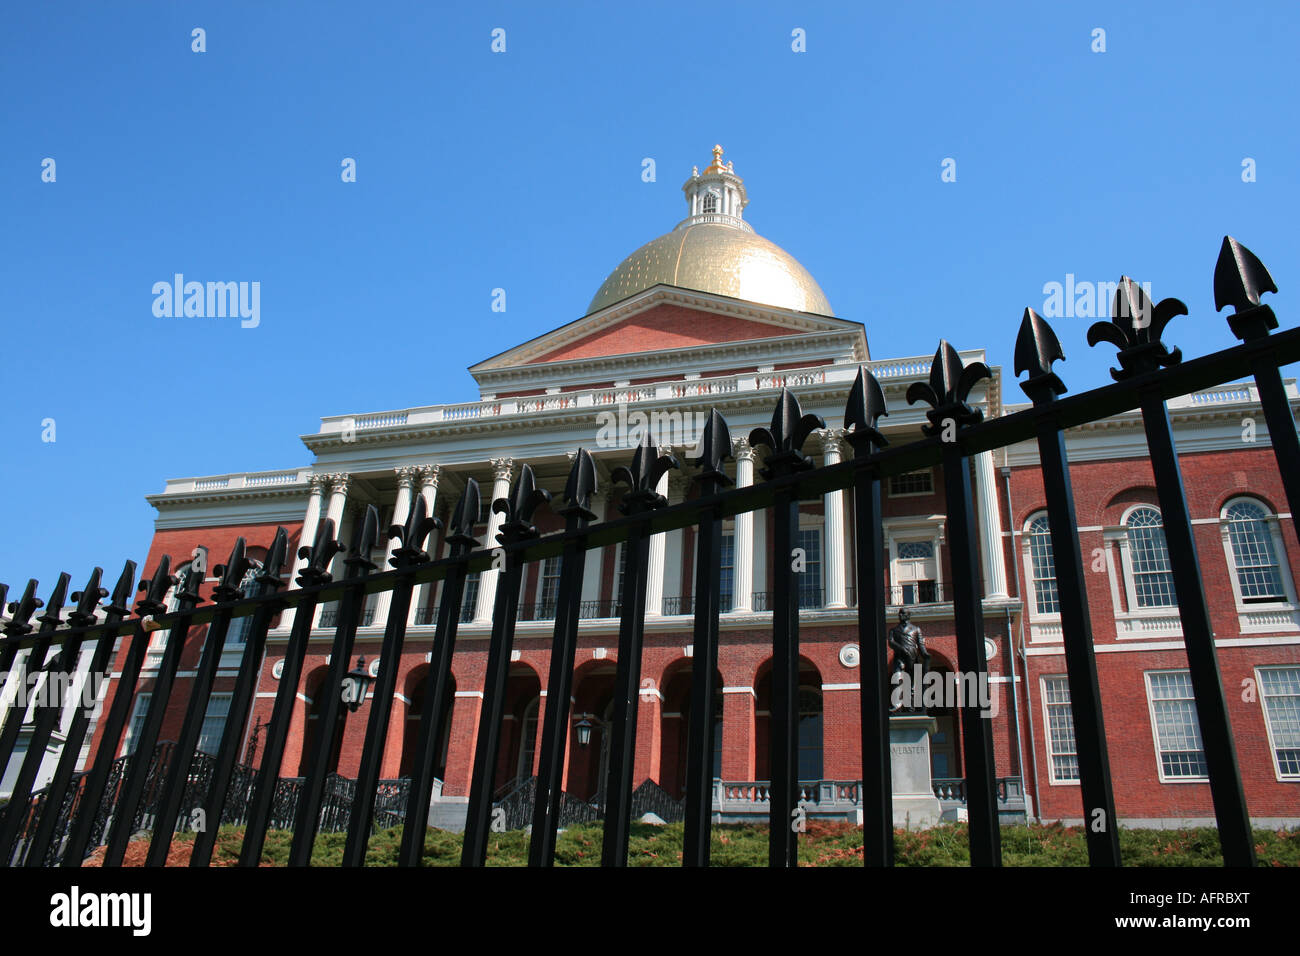 Iron gate in front of the Massachusetts State House, Boston. Stock Photo